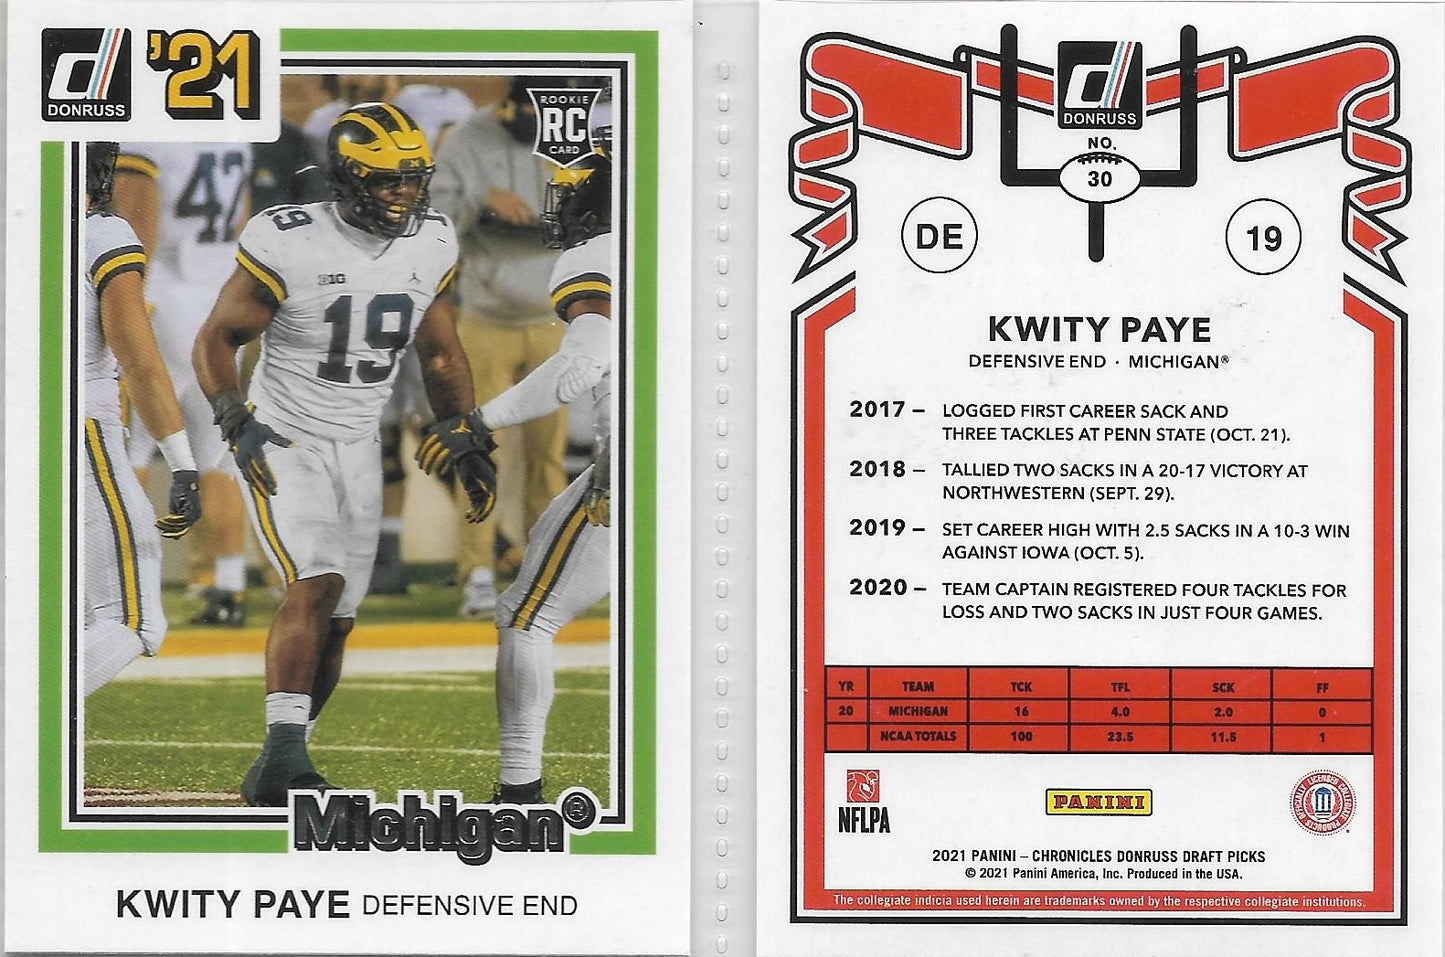 2021 Donruss Chronicles Draft #19 KWITTY PAYE INDIANAPOLIS COLTS MICHIGAN WOLVERINES ROOKIE CARD